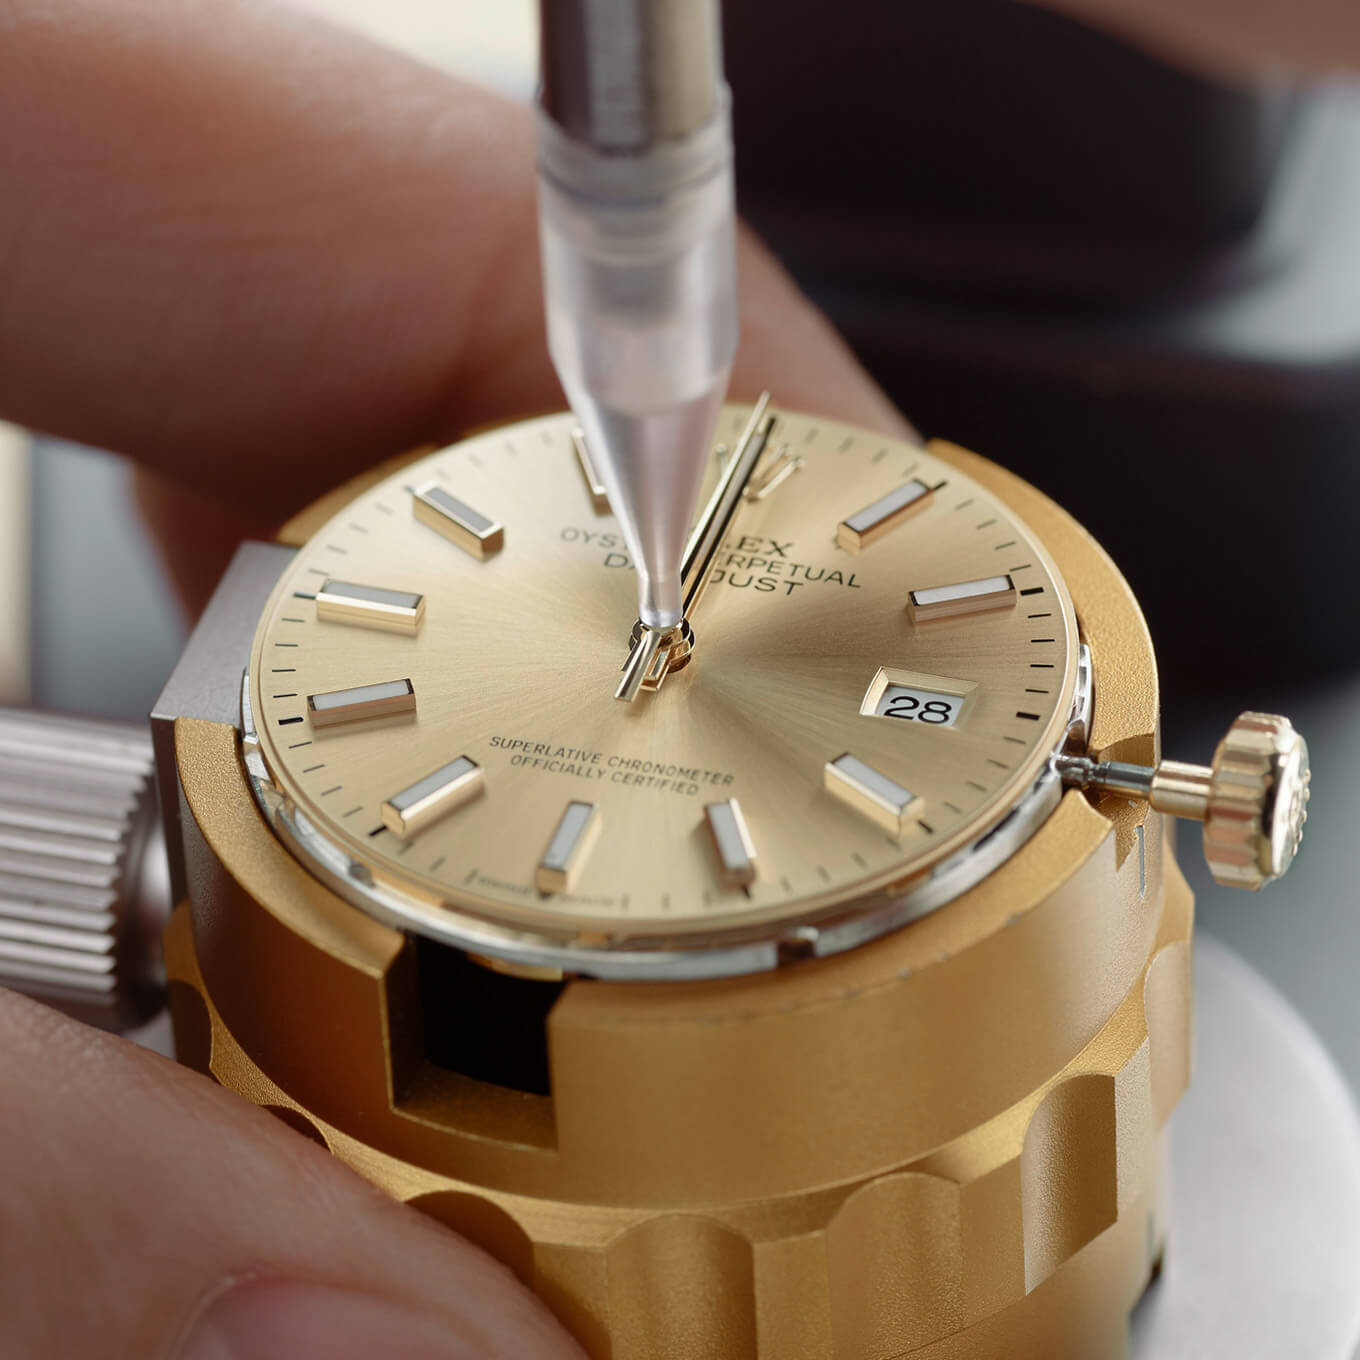 How to Polish Gold Jewelry The Right Way, Jewelry, Rolex Watch Repair, Gold Buying